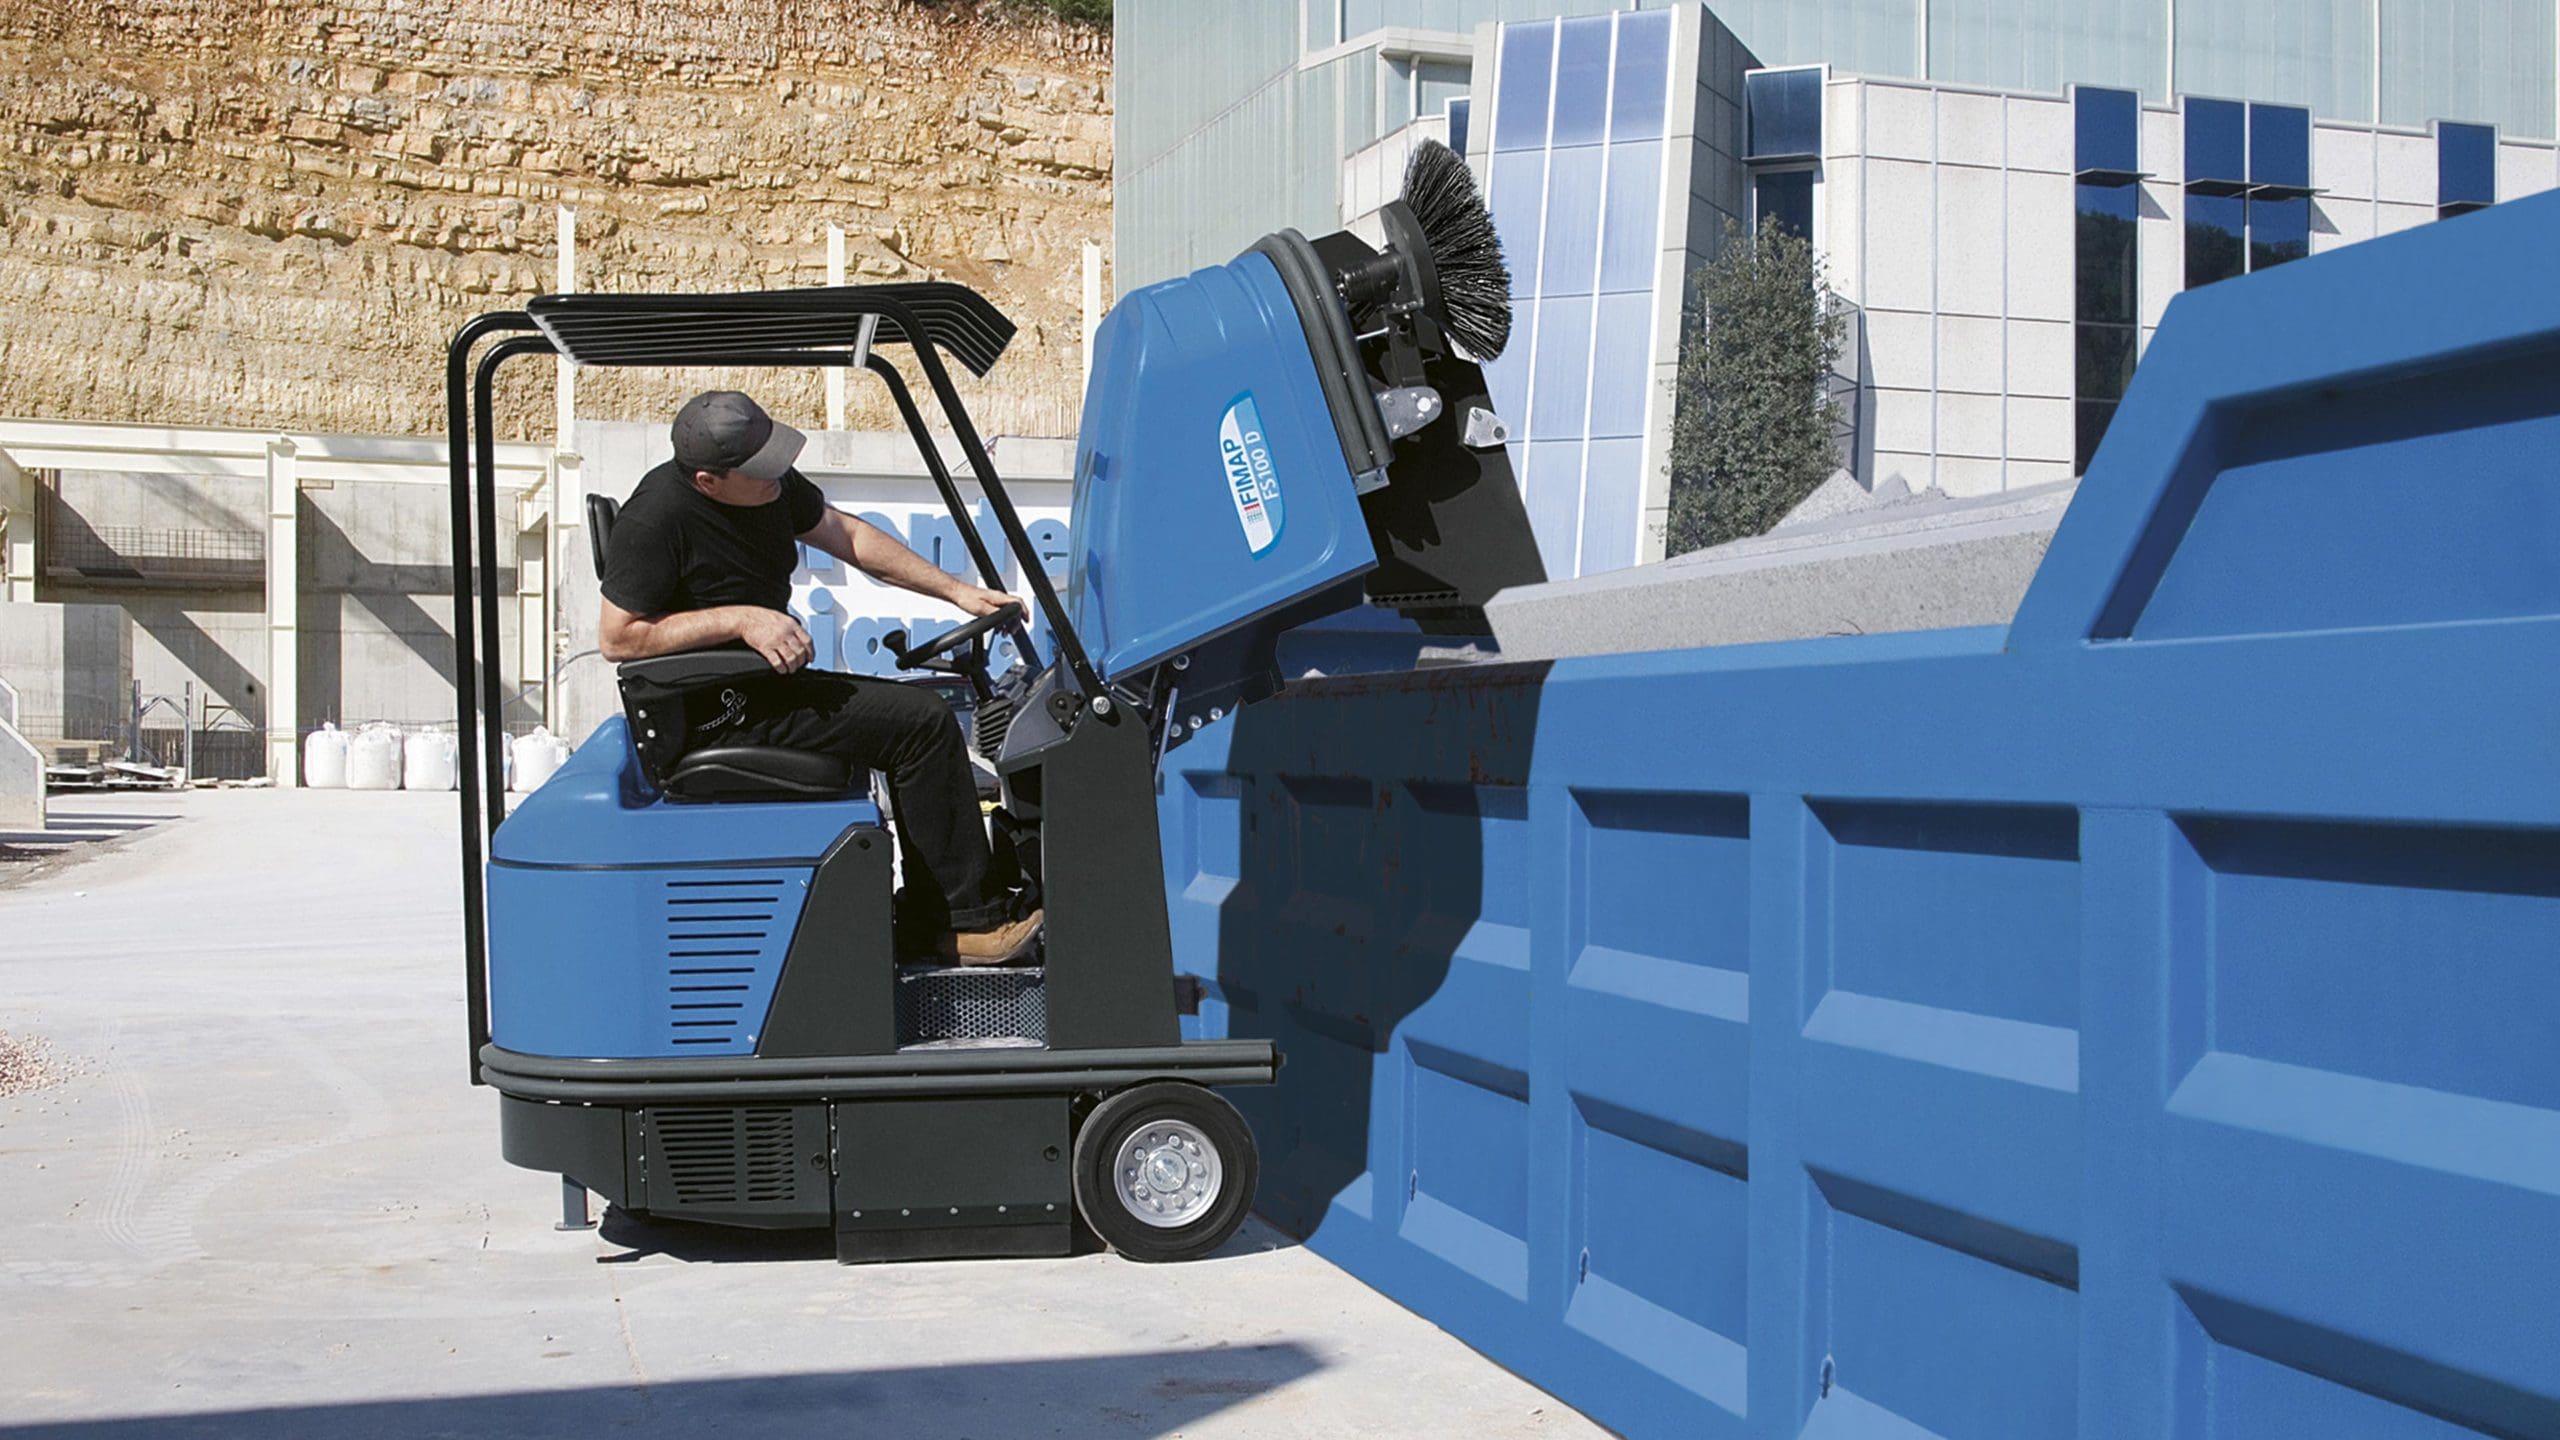 Removing Toxins With Sweeper Machines - Sweepers PTY PTD